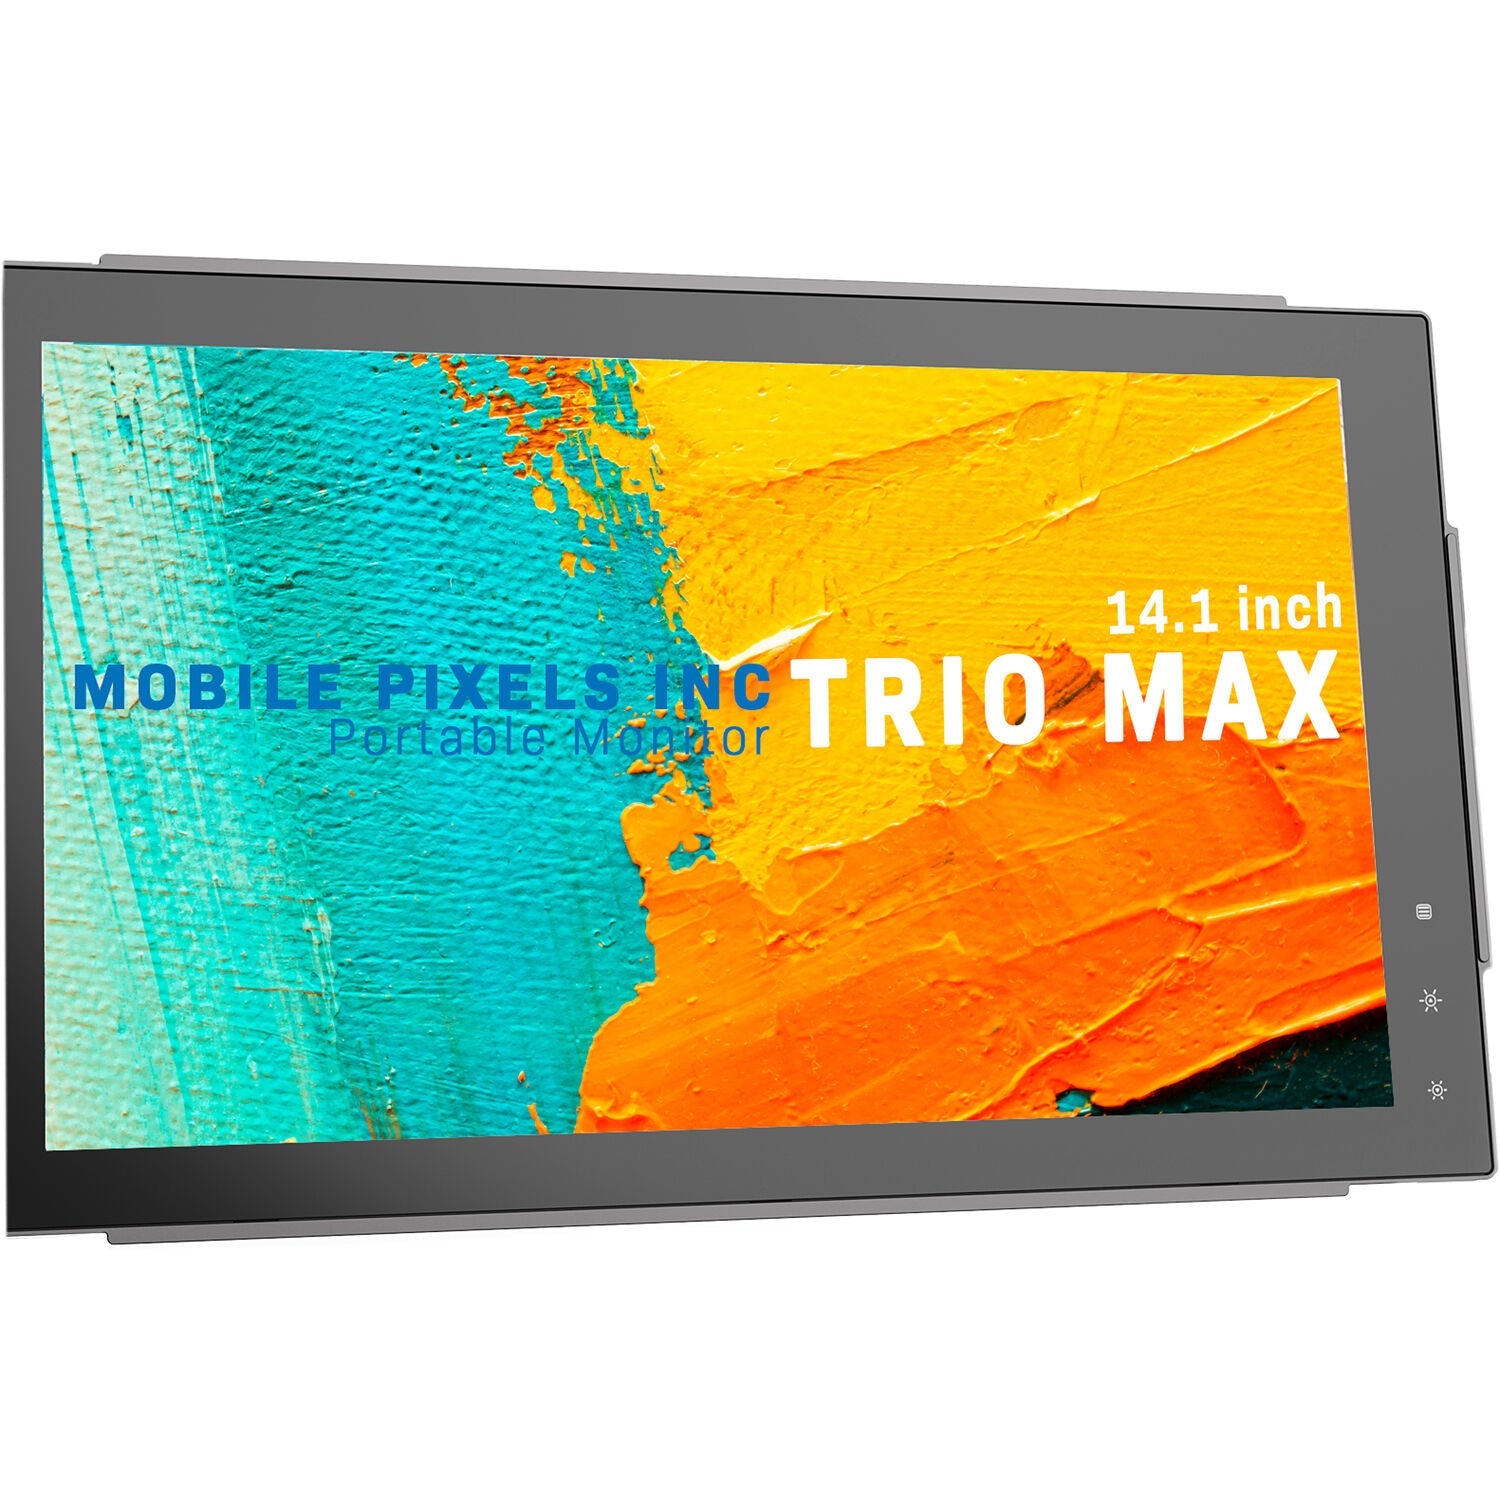 Mobile Pixels MPTRIOMAX2-RB 14.1" Trio Max Full HD IPS Portable Monitor, Triple Monitor - Certified Refurbished